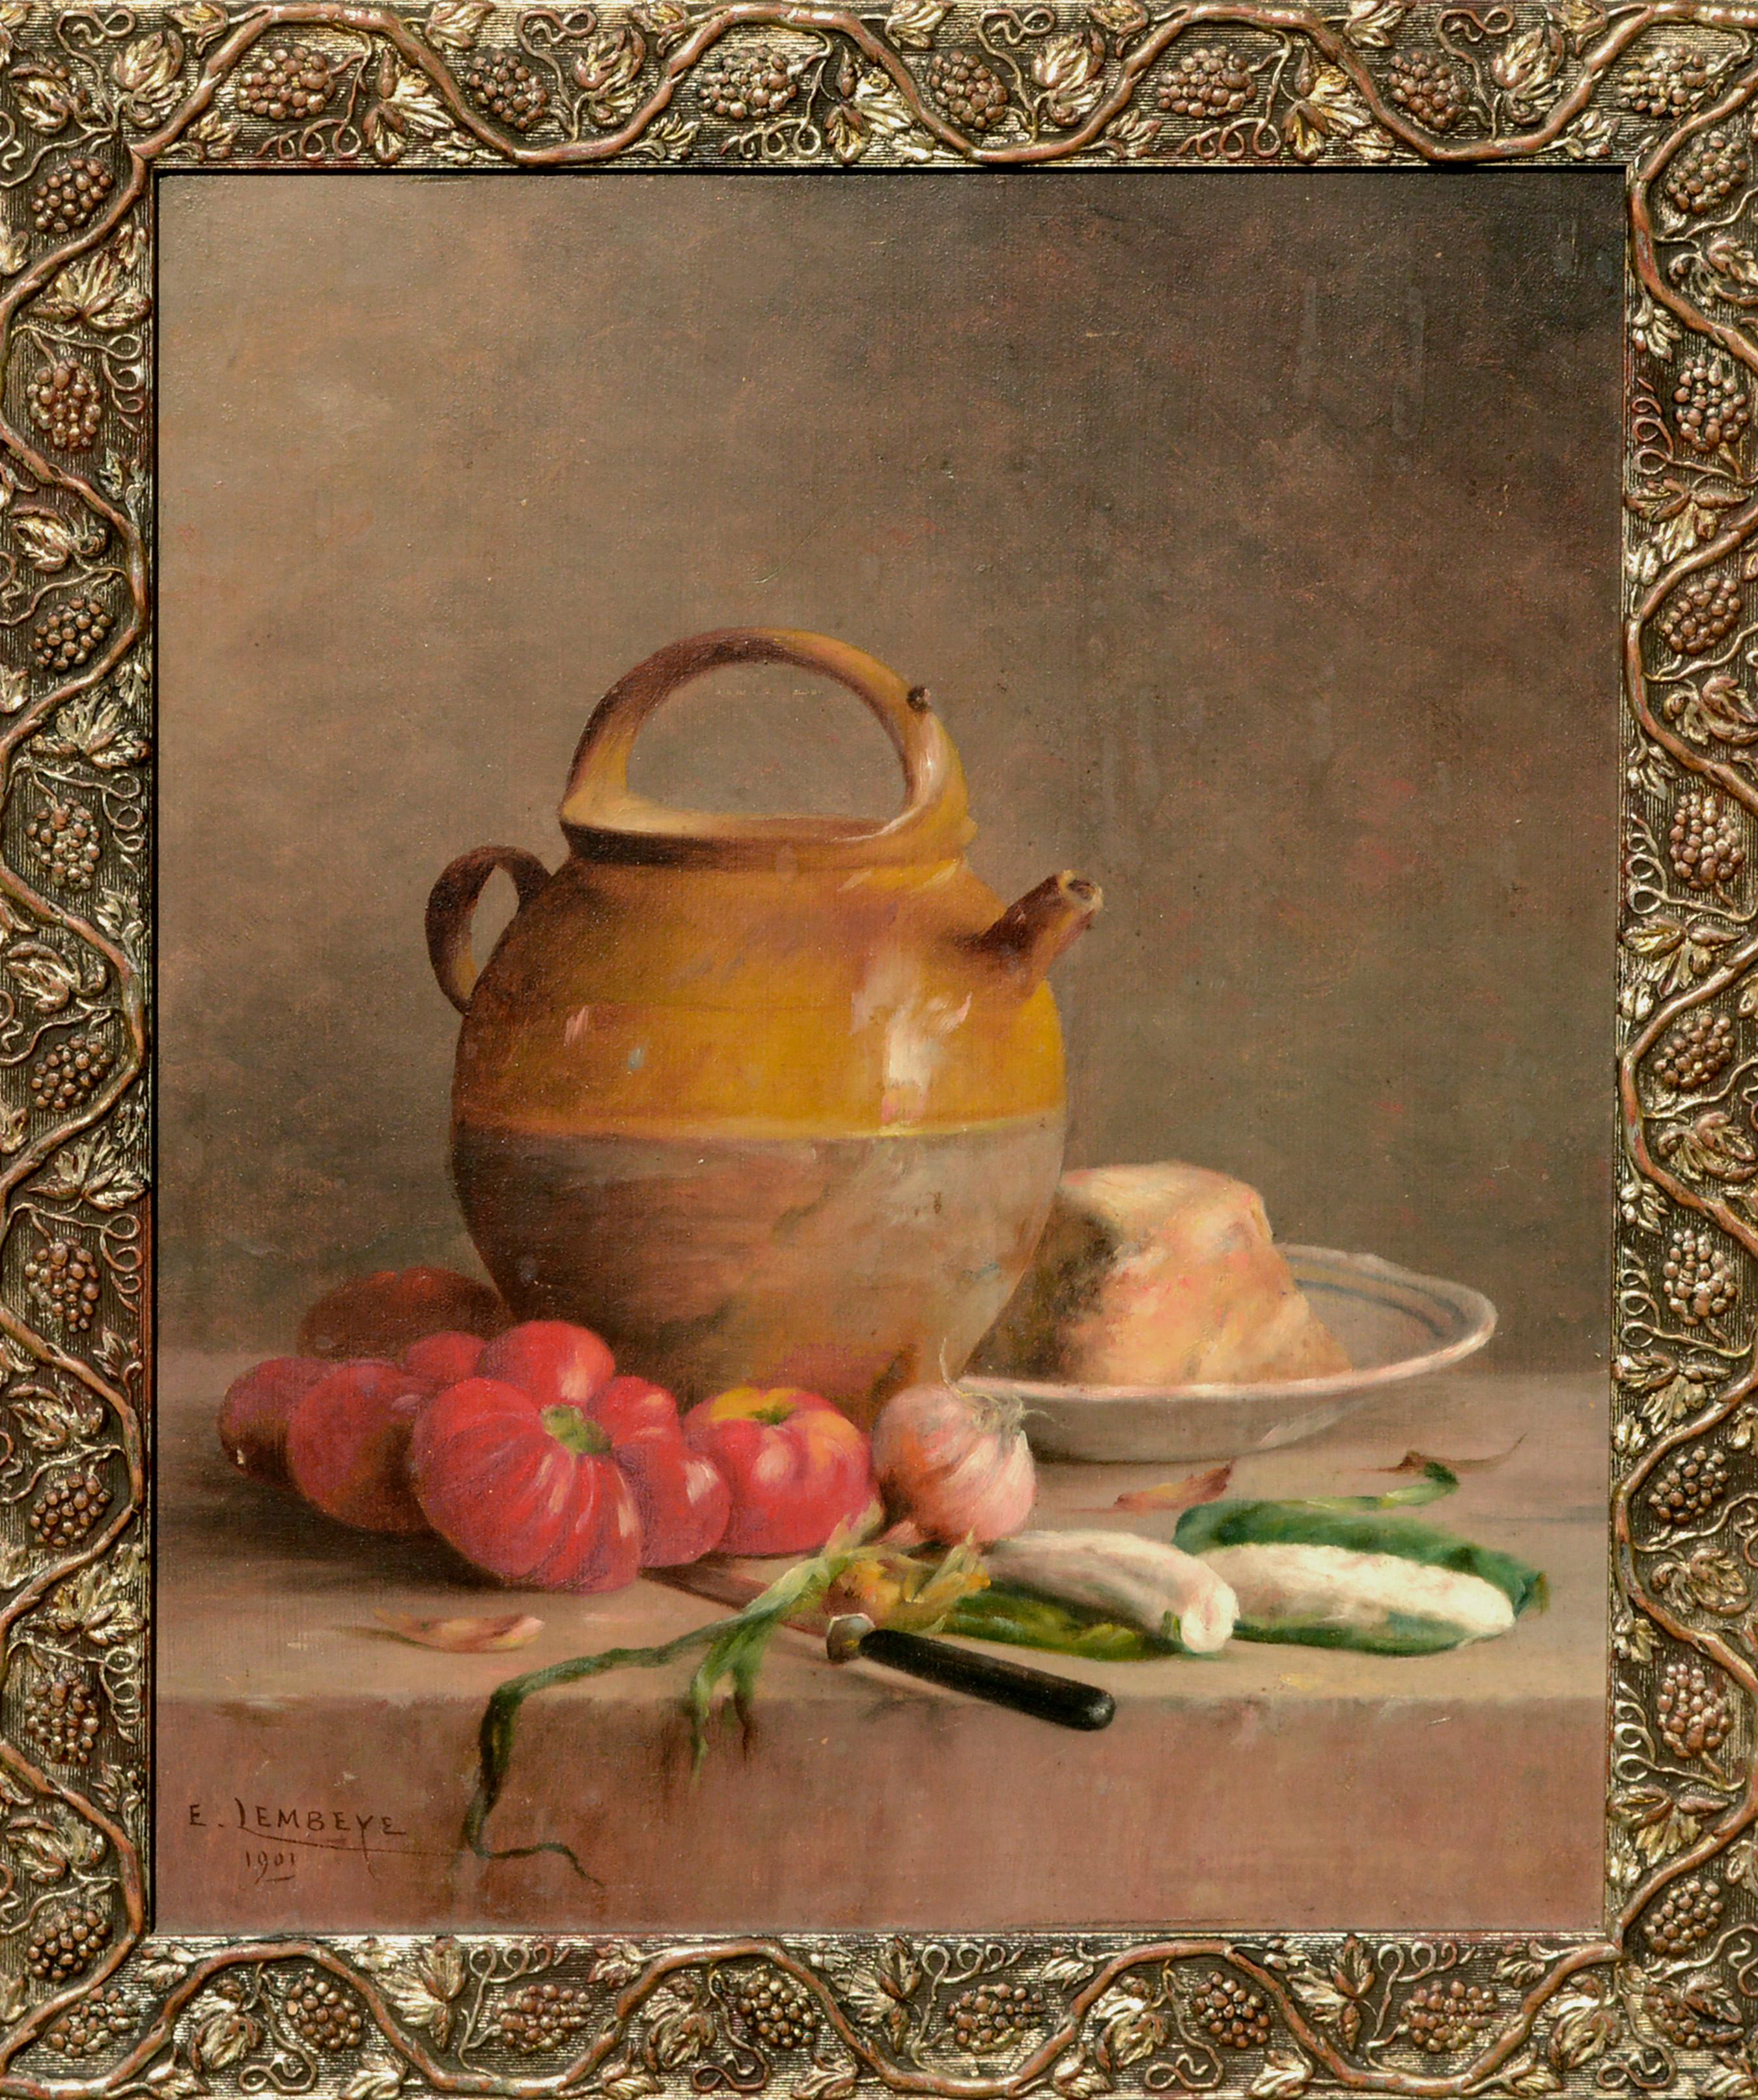 Etienne Lembeye Still-Life Painting - Turn of the Century French Provincial Still Life 